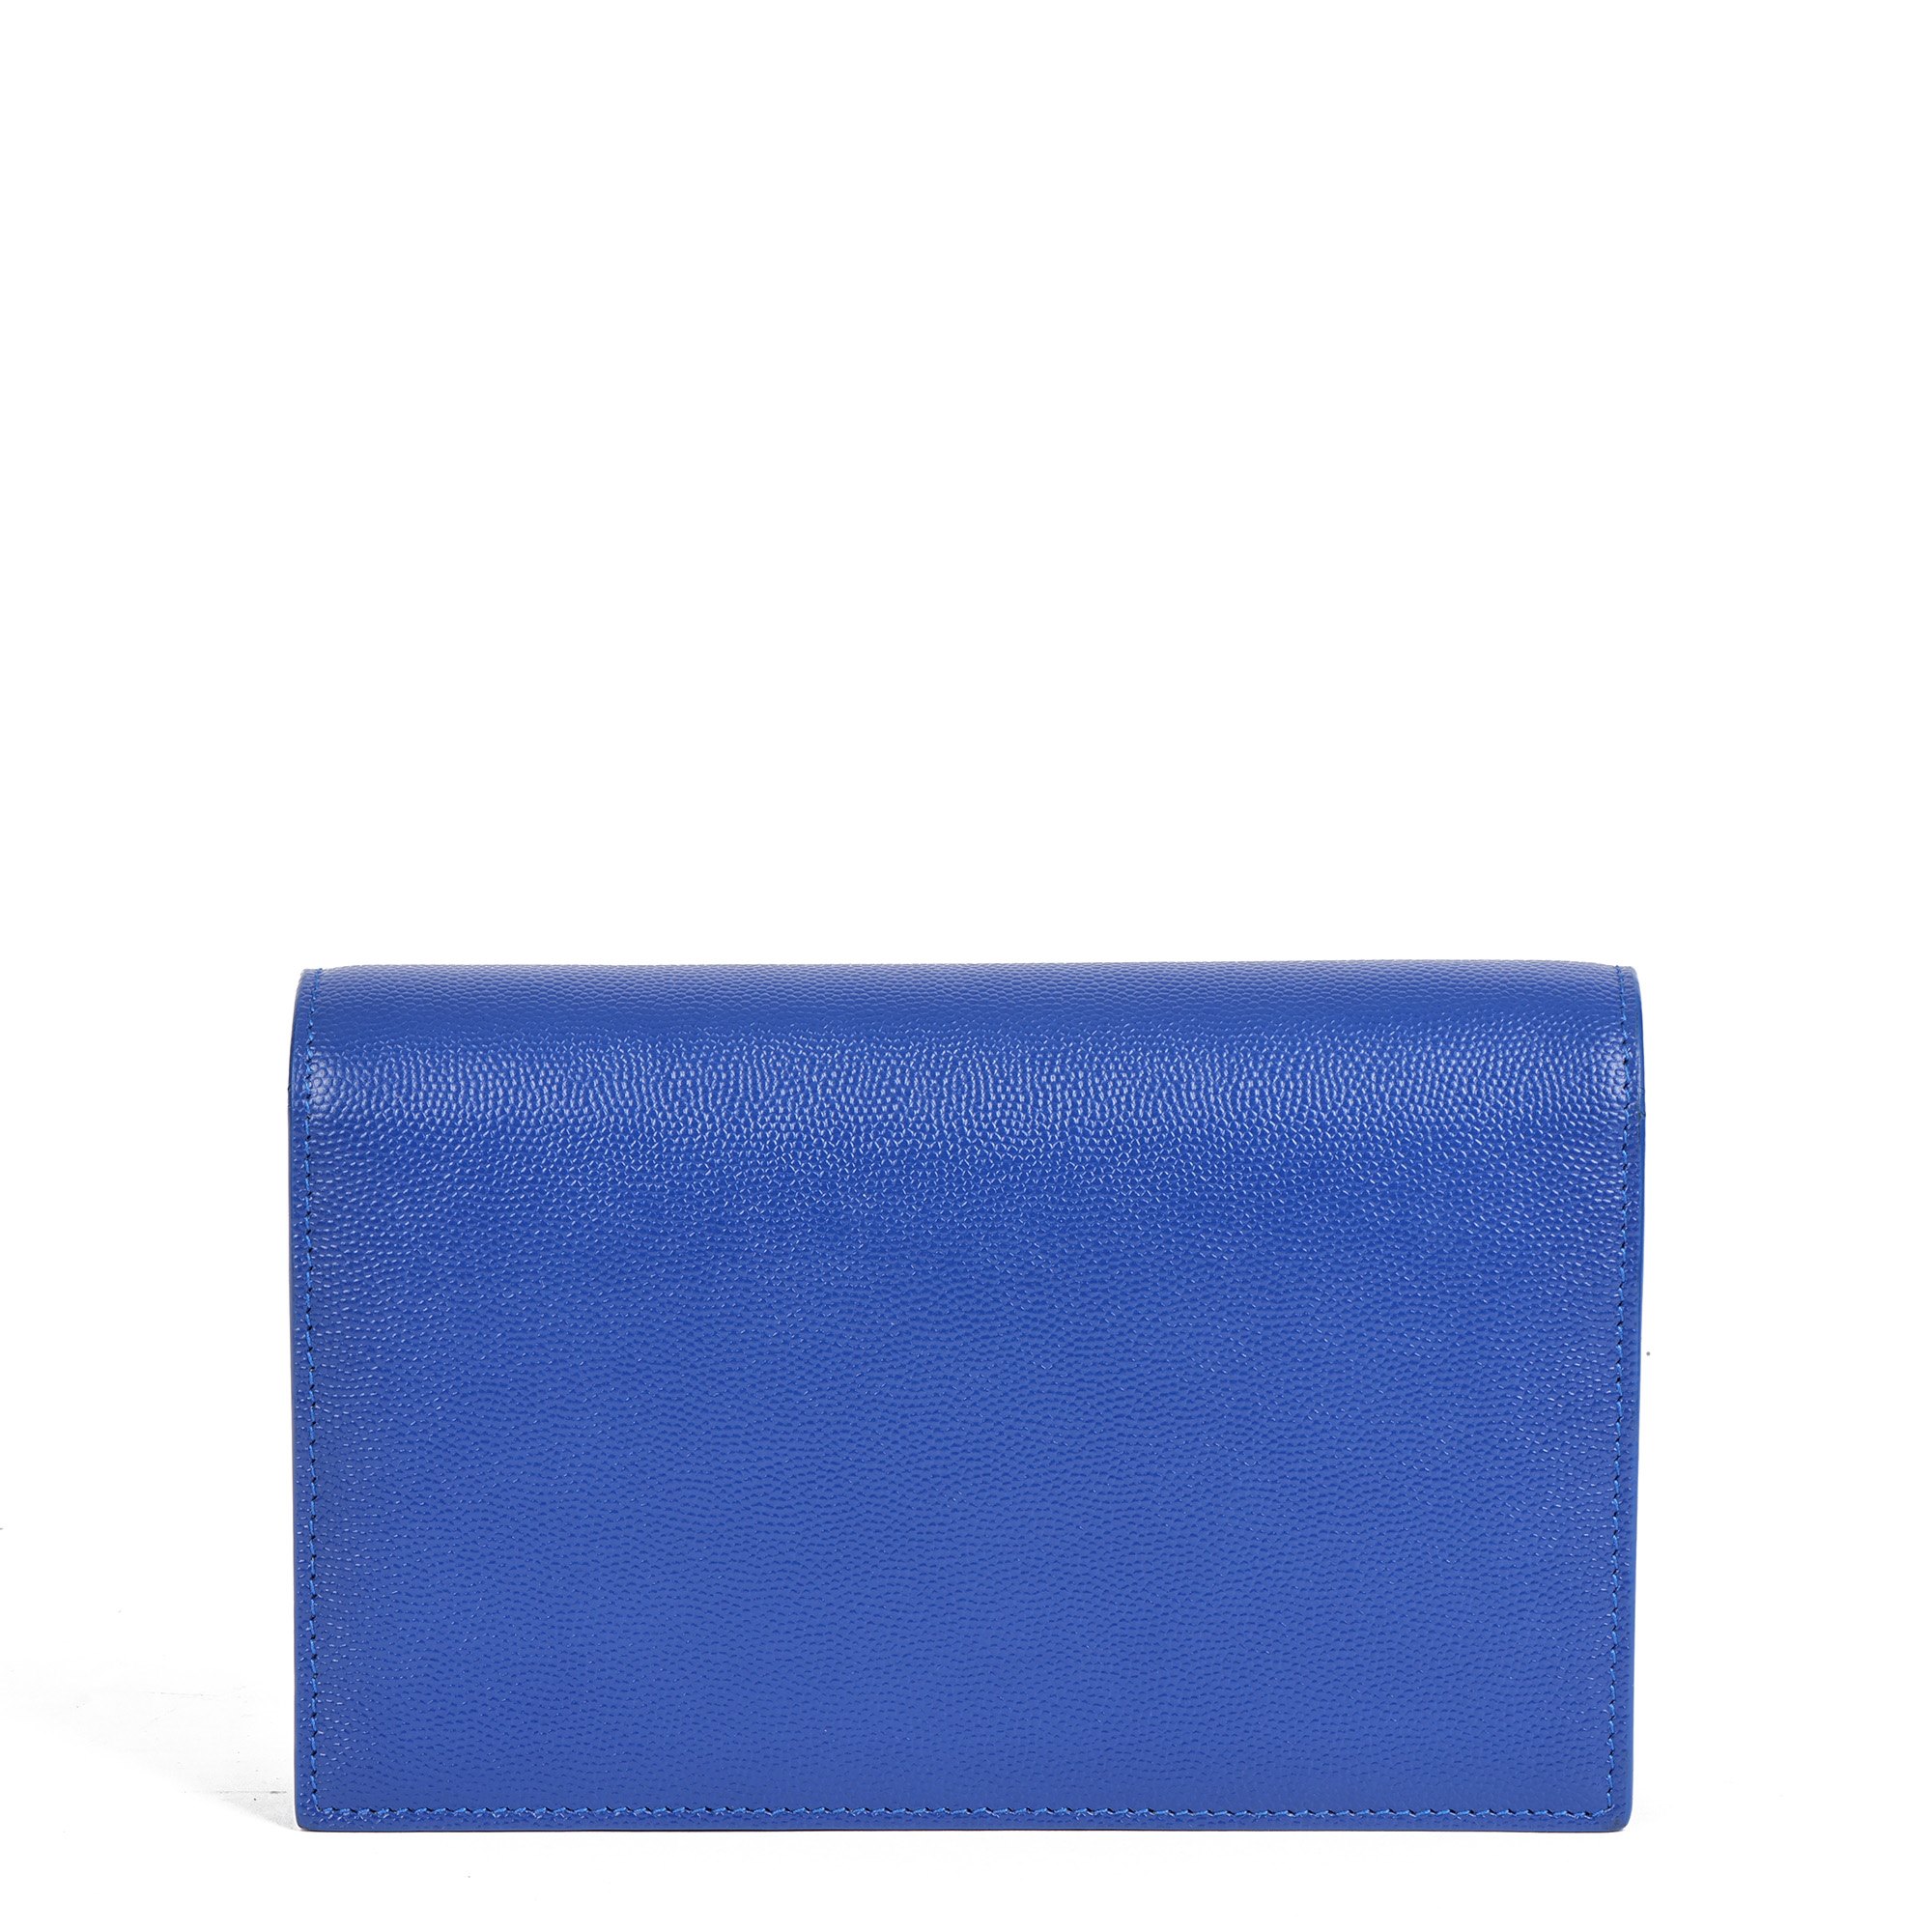 Saint Laurent Blue Electric Grained Calfskin Leather Kate Chain Wallet with Tassel